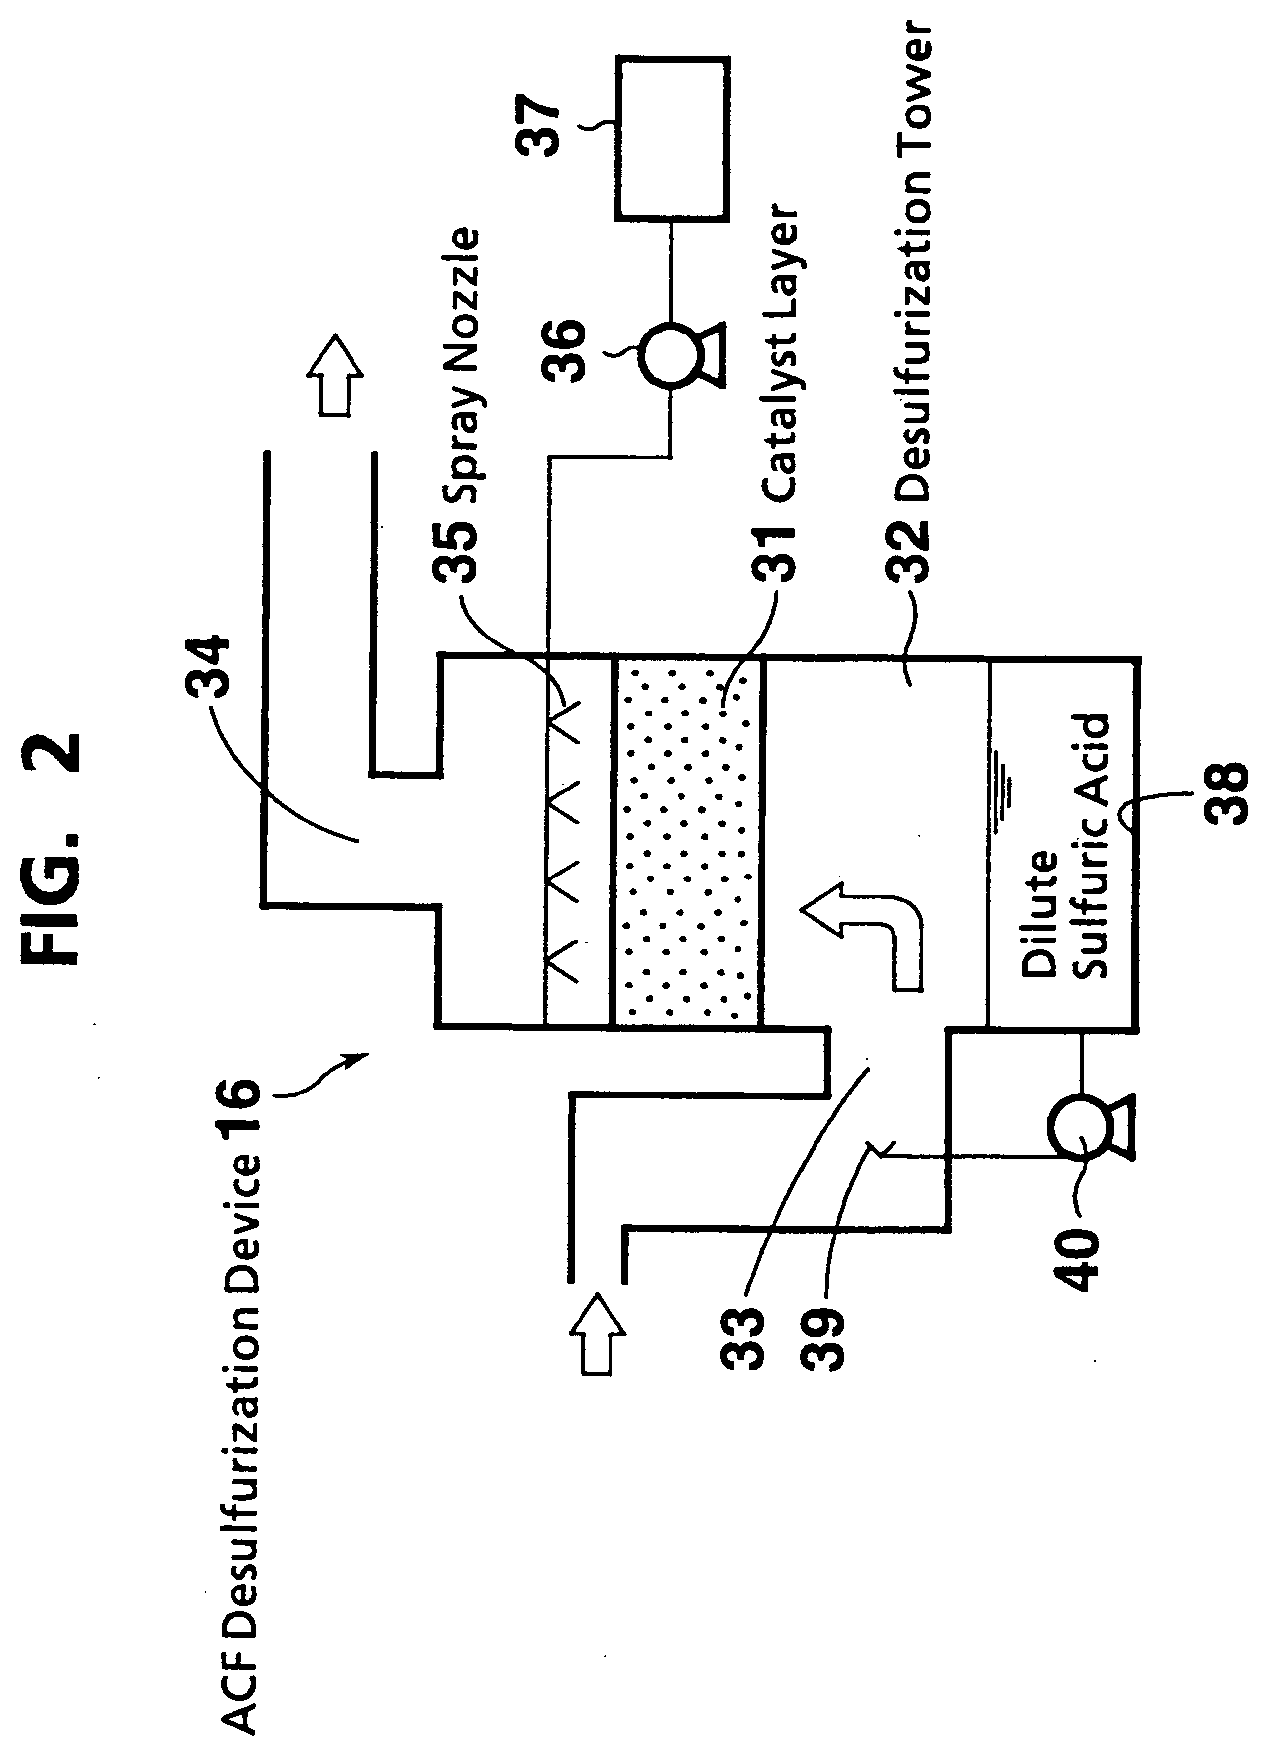 Exhaust gas treatment system